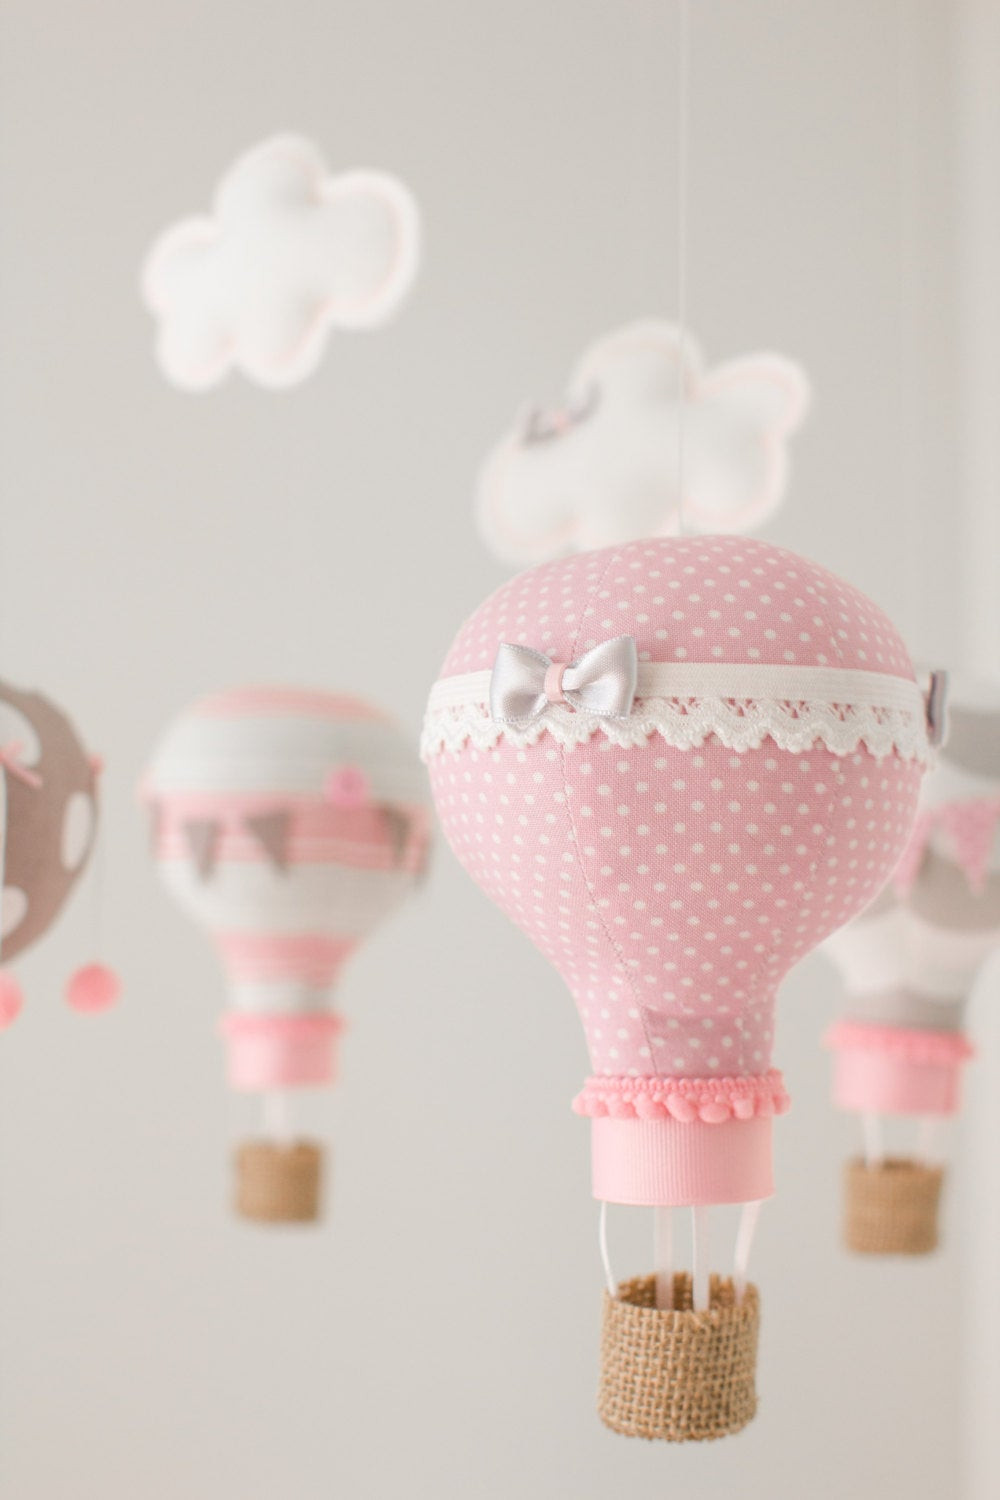 Hot Air Balloon Baby Decor
 Hot Air Balloon Baby Mobile Nursery Decoration Pink and